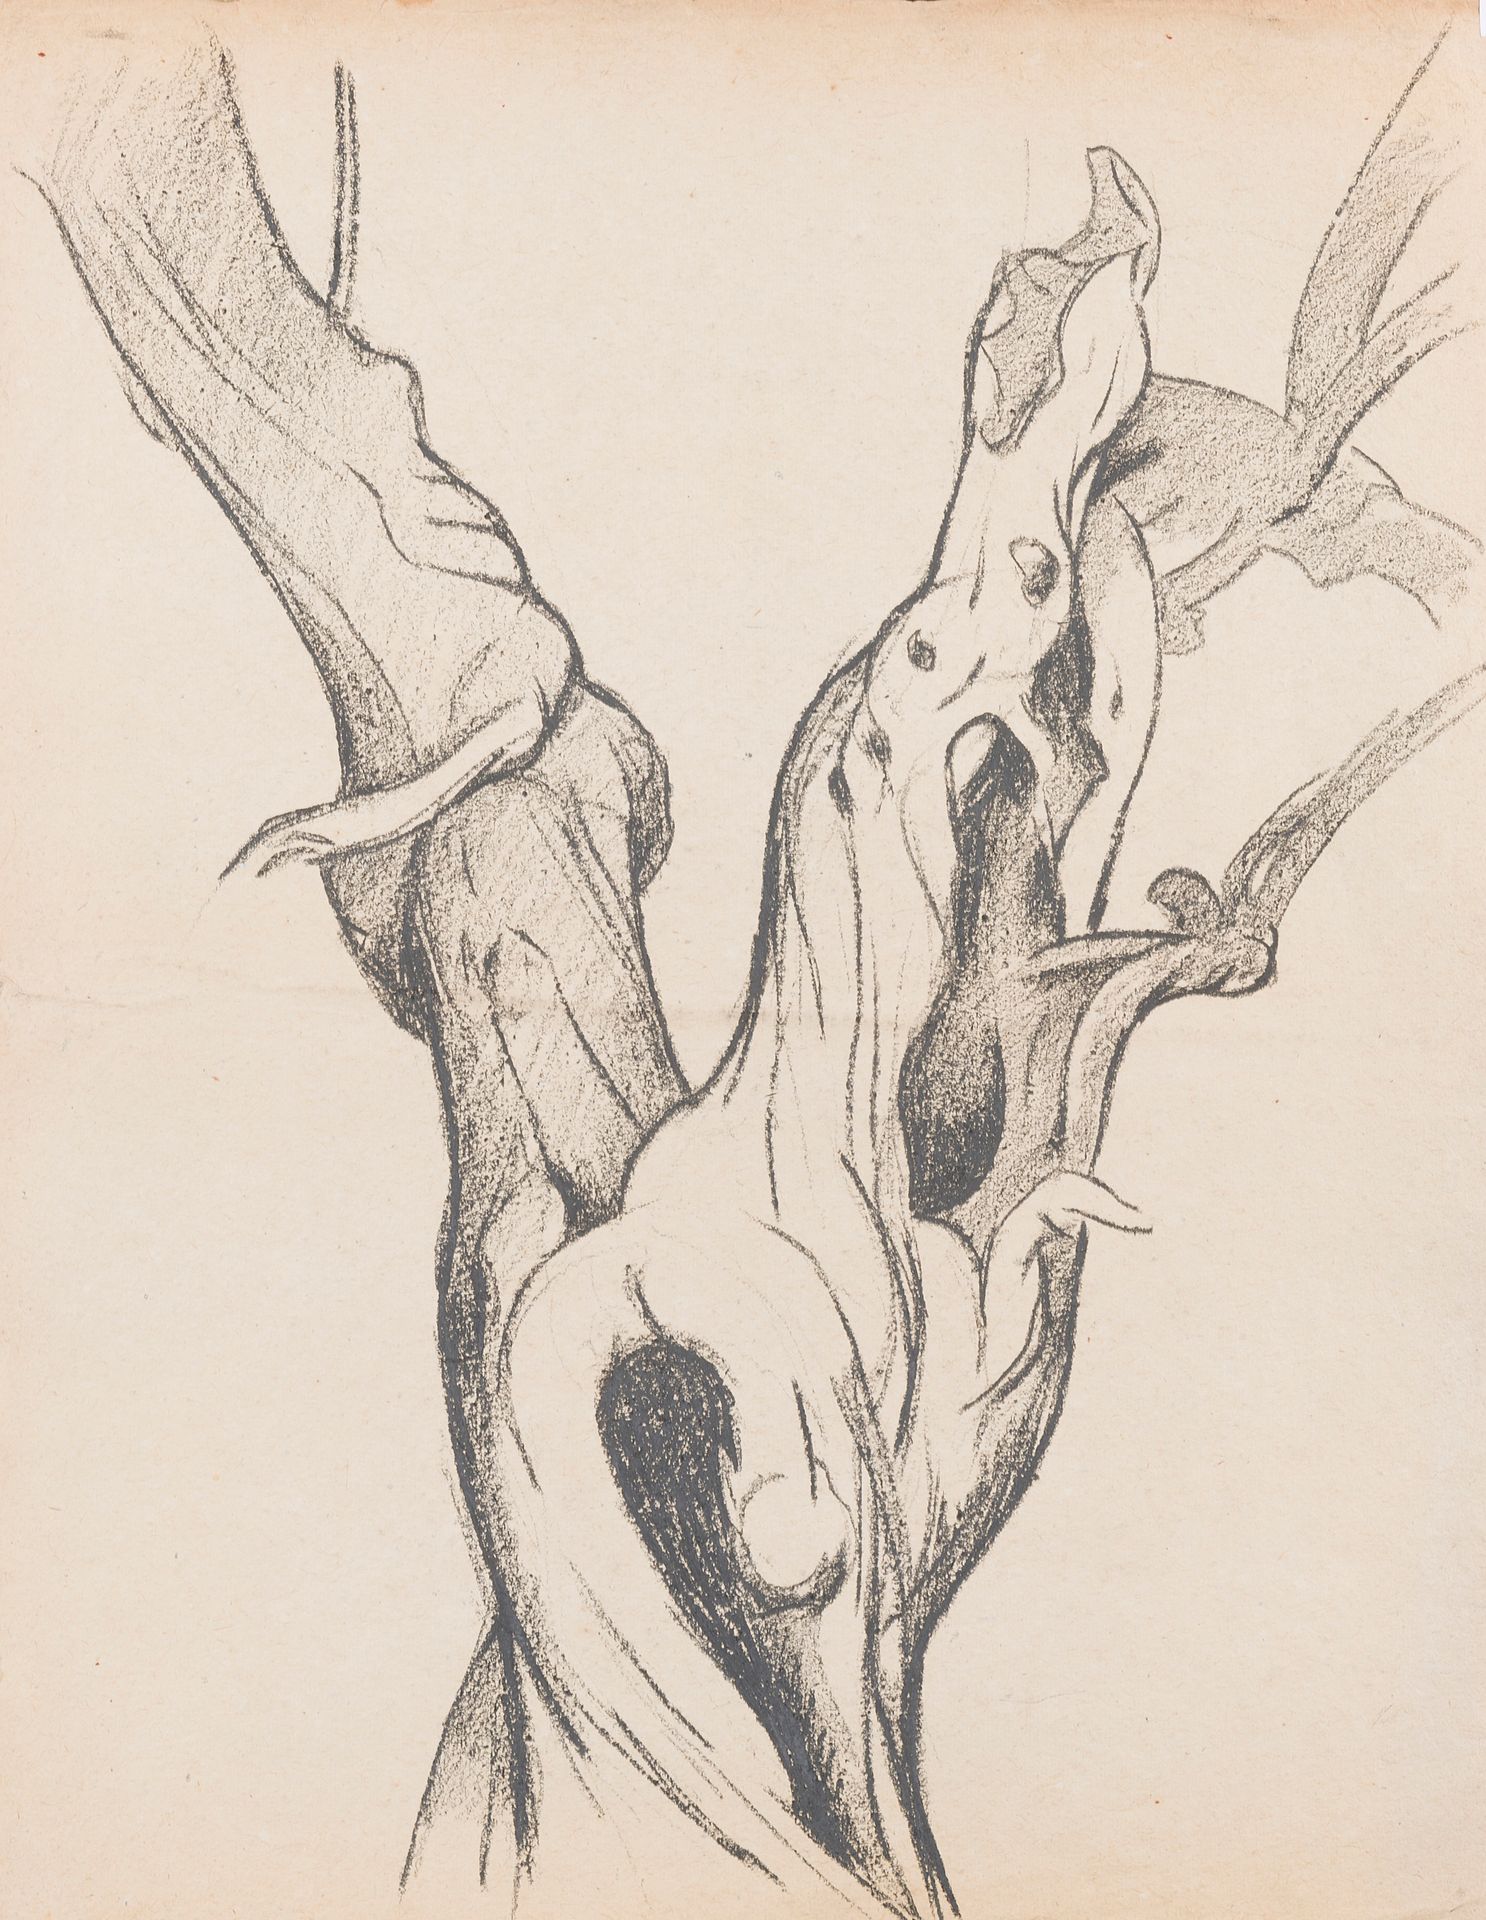 Null Charles PICART LE DOUX (1881-1959)
Dead tree, 1935
Charcoal
57 x 44 cm